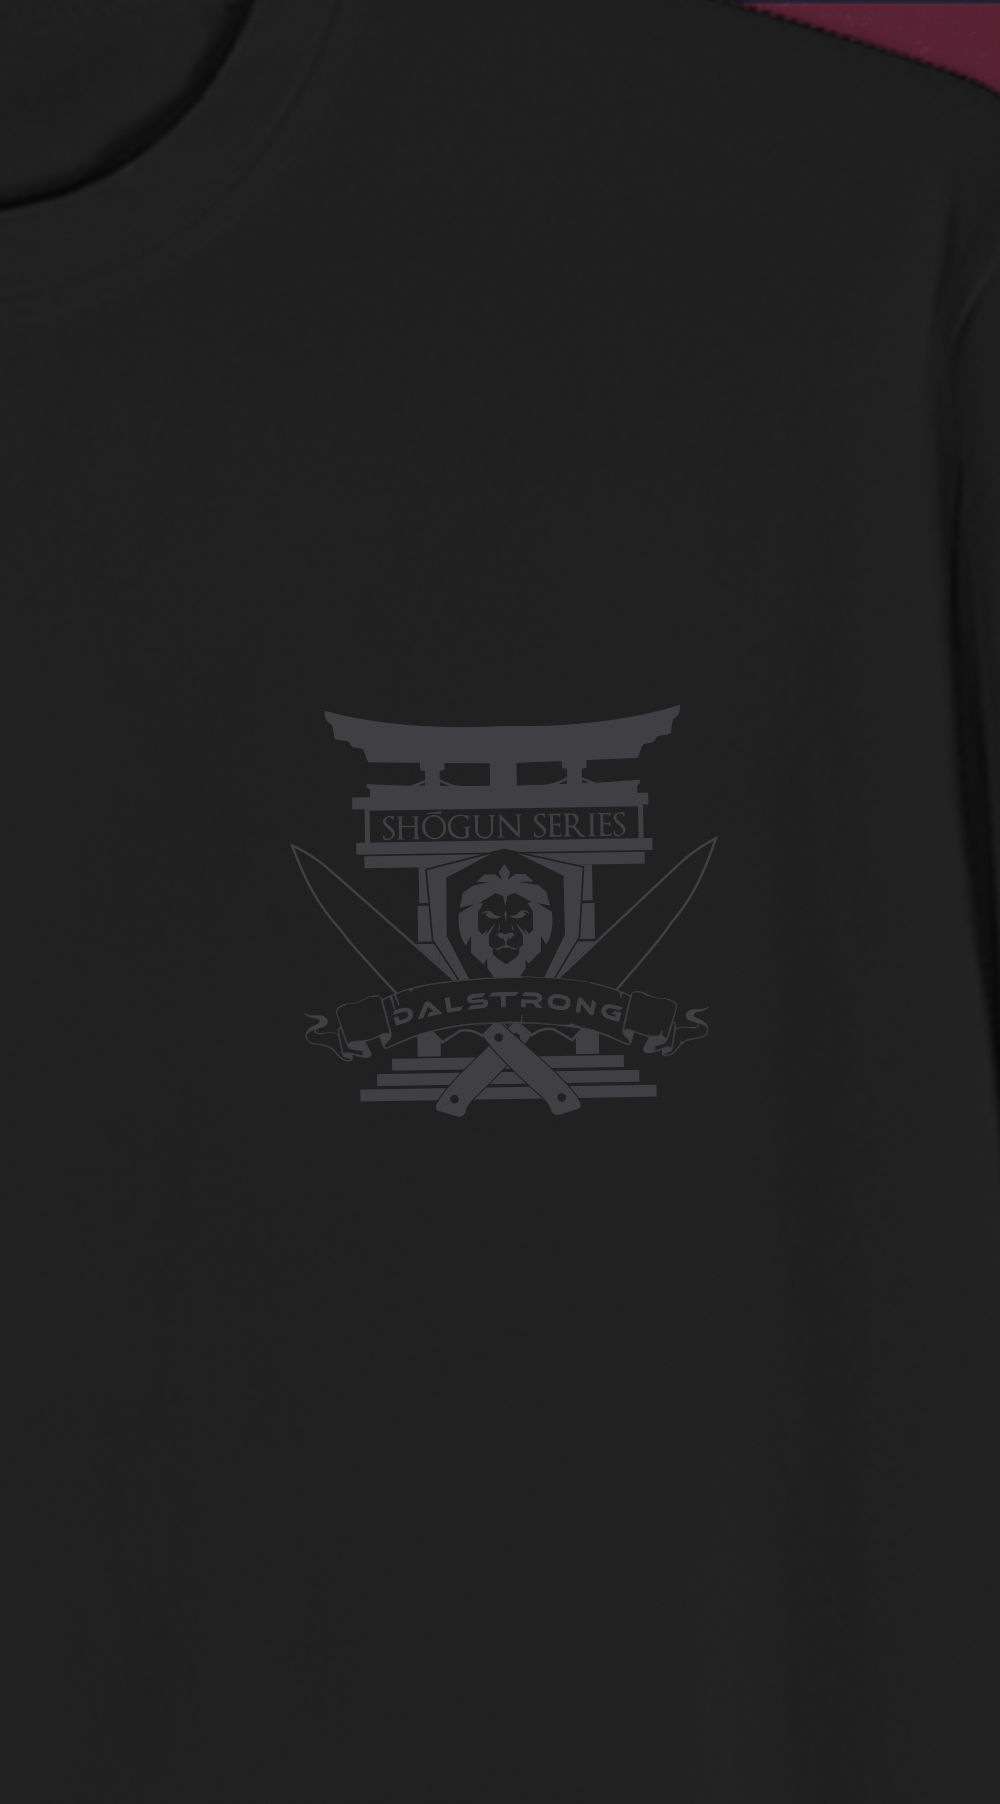 Dalstrong the shogun series blades up tee black front design.